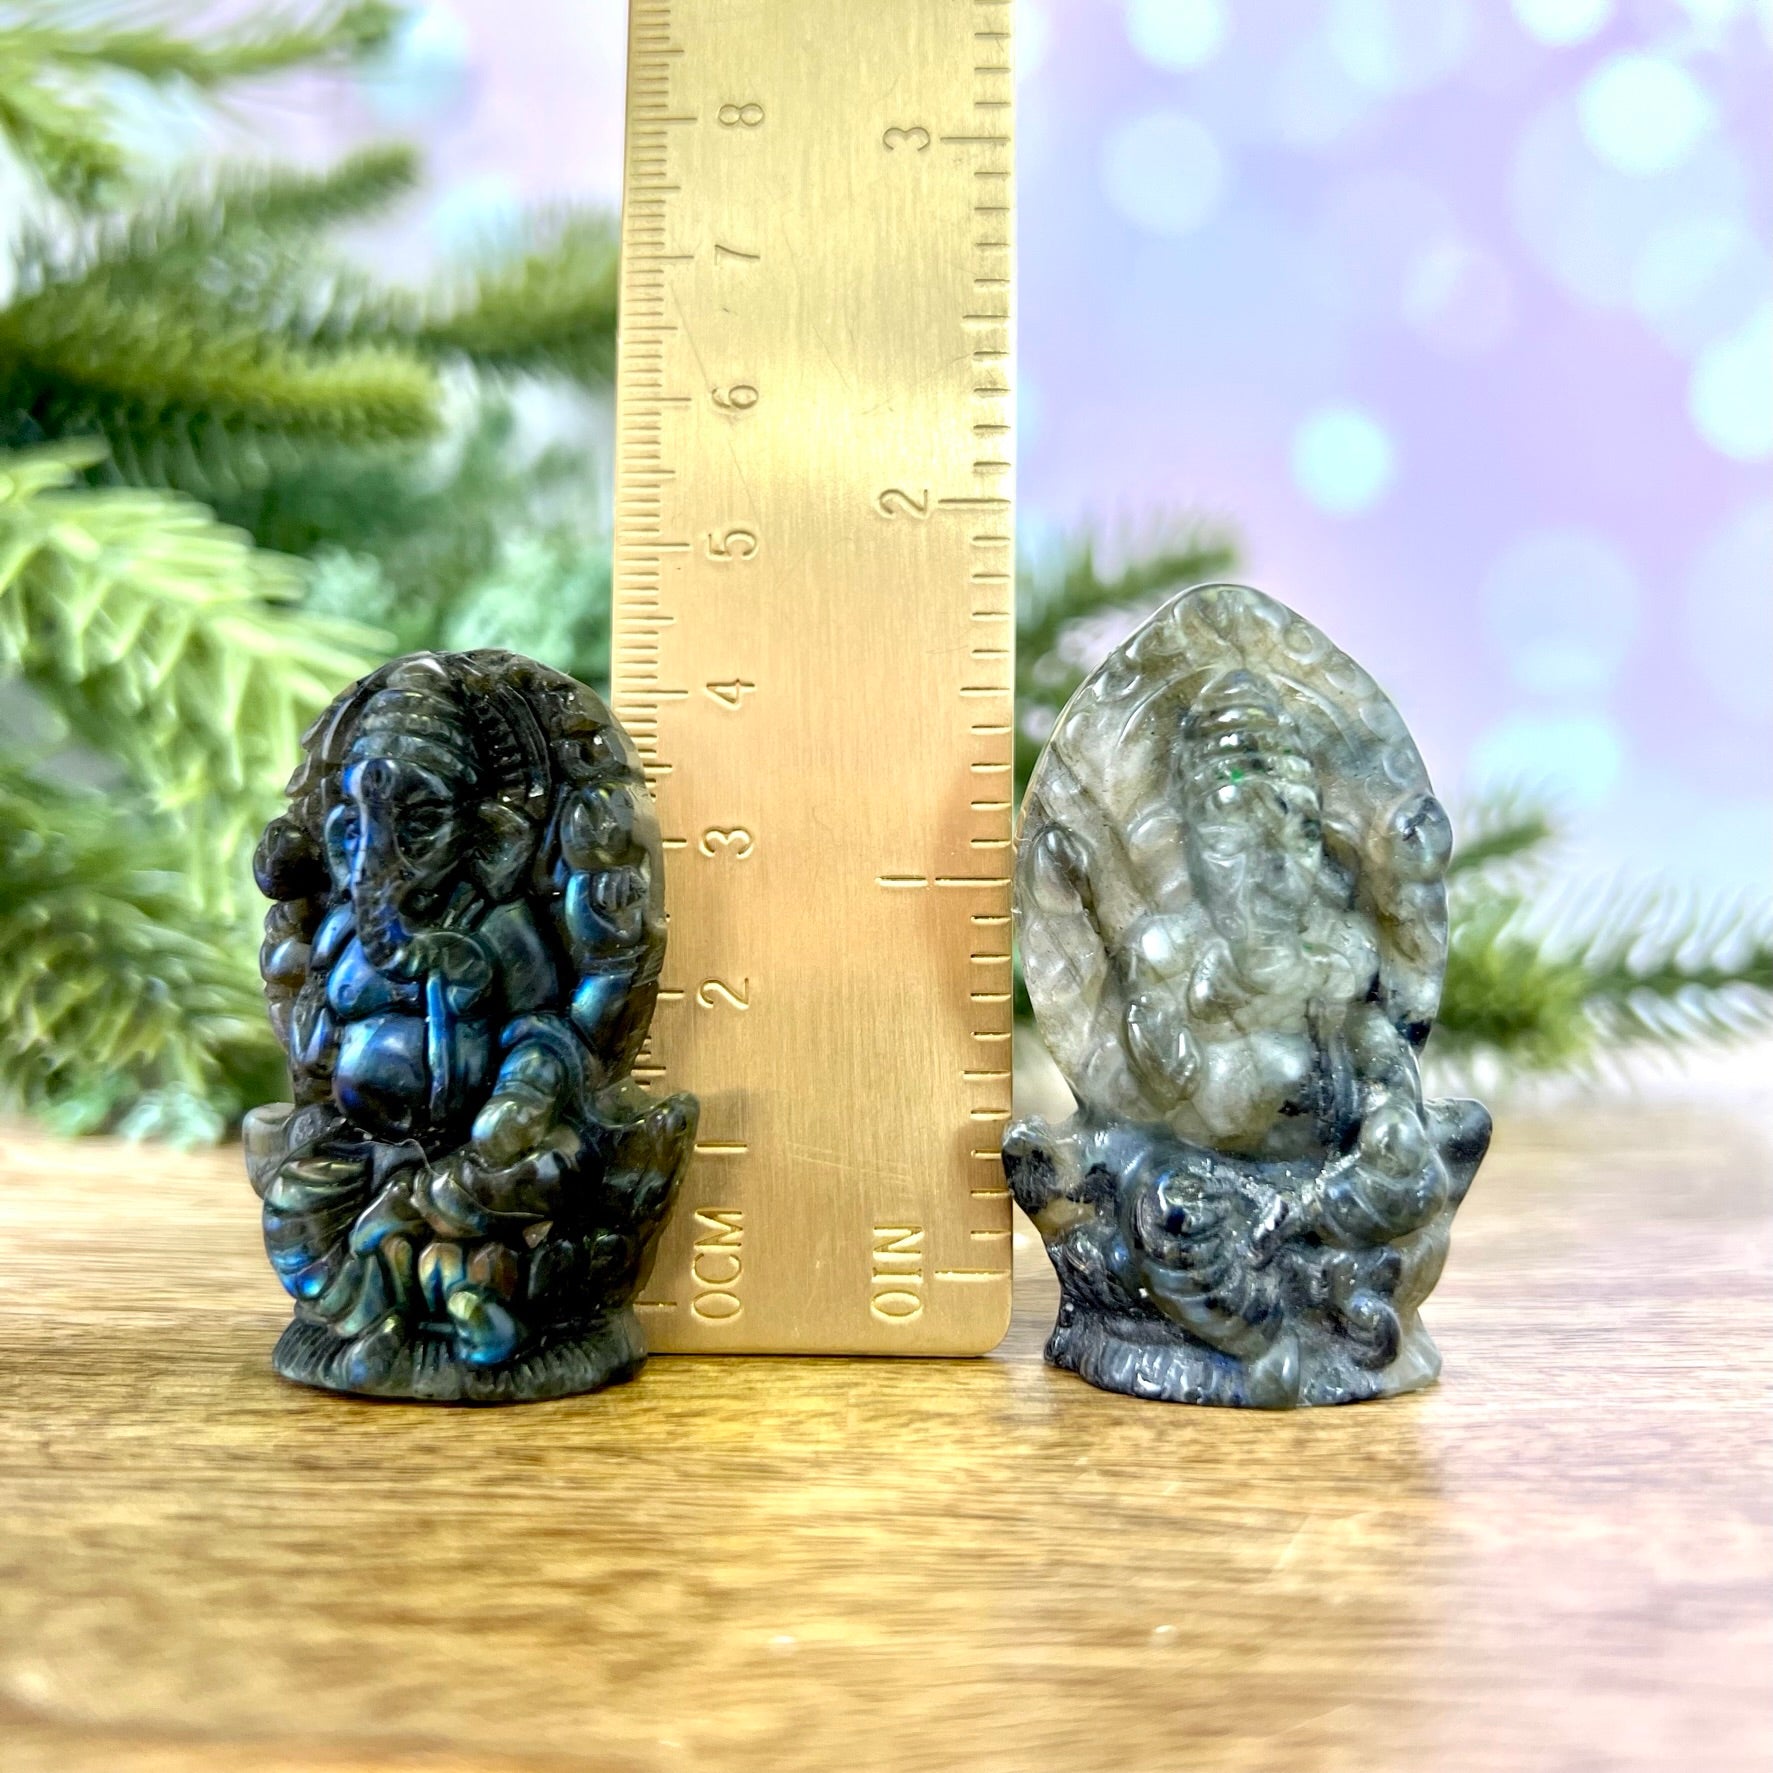 a close up of two figurines near a ruler